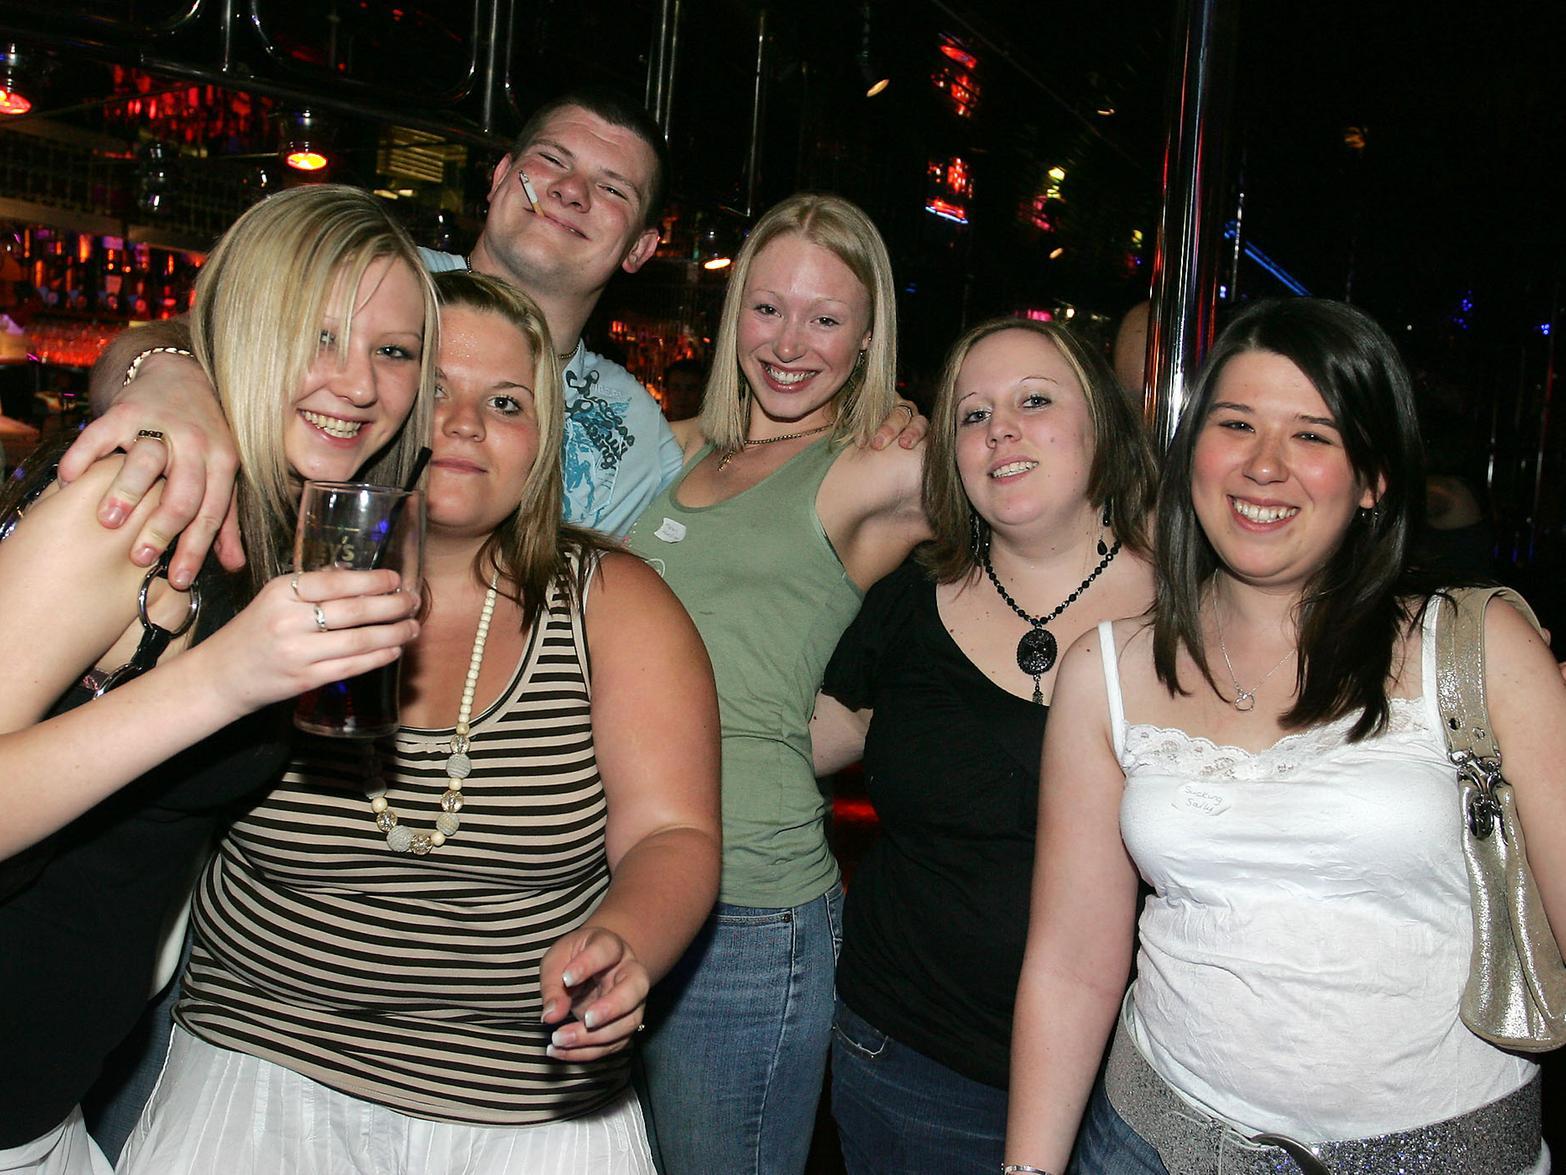 Stacey Phillips (centre) celebrates her 20th birthday with friends at The Frontier in Batley.